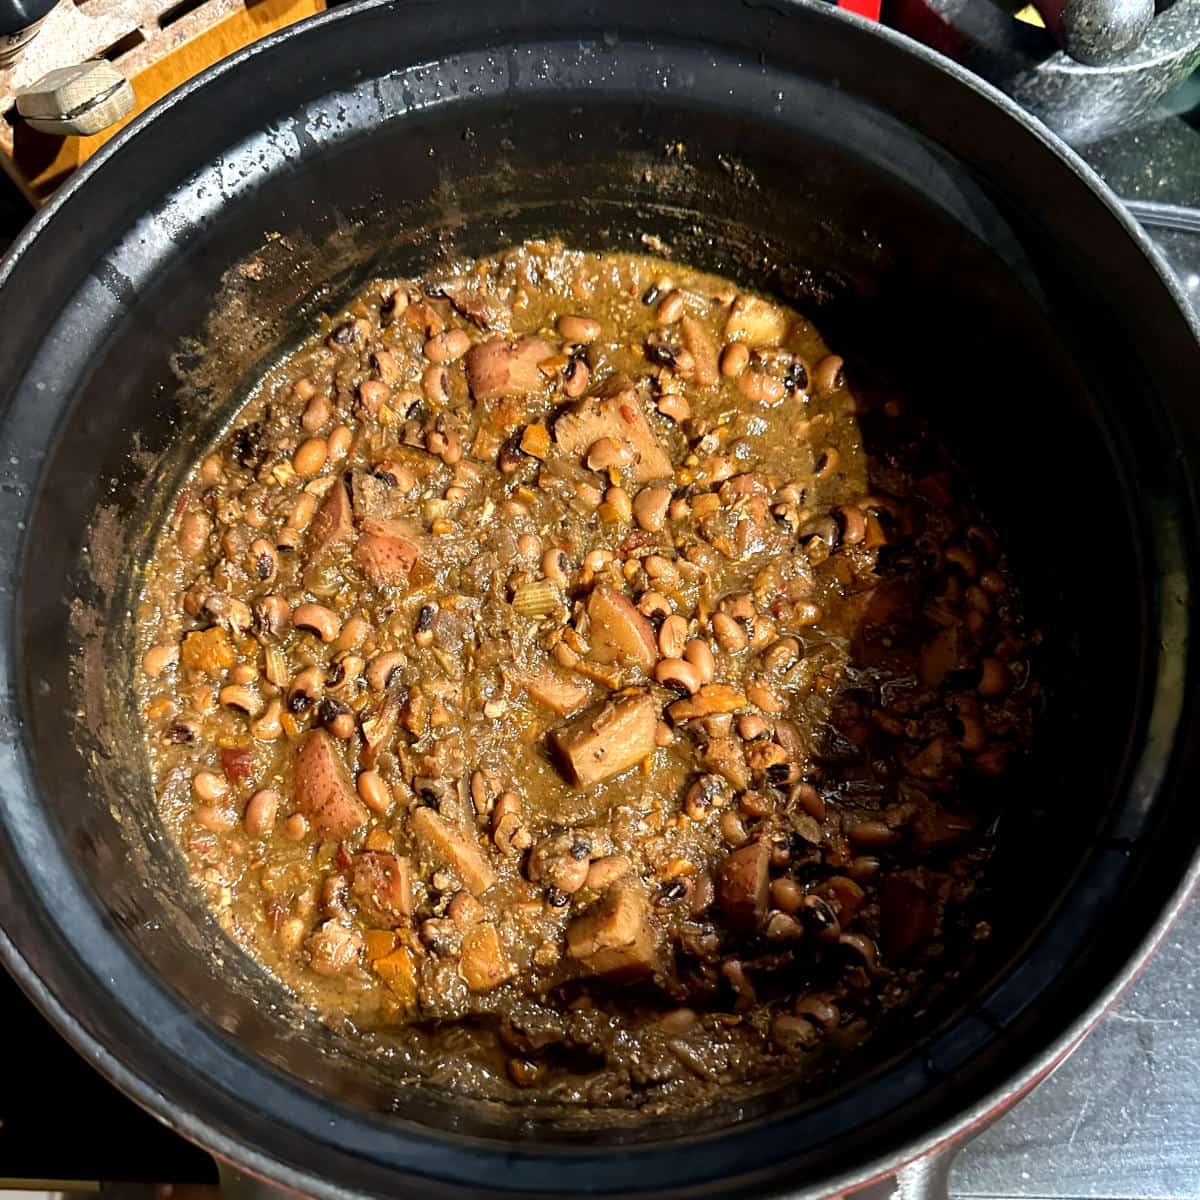 Black eyed peas, cooked, in slow cooker.